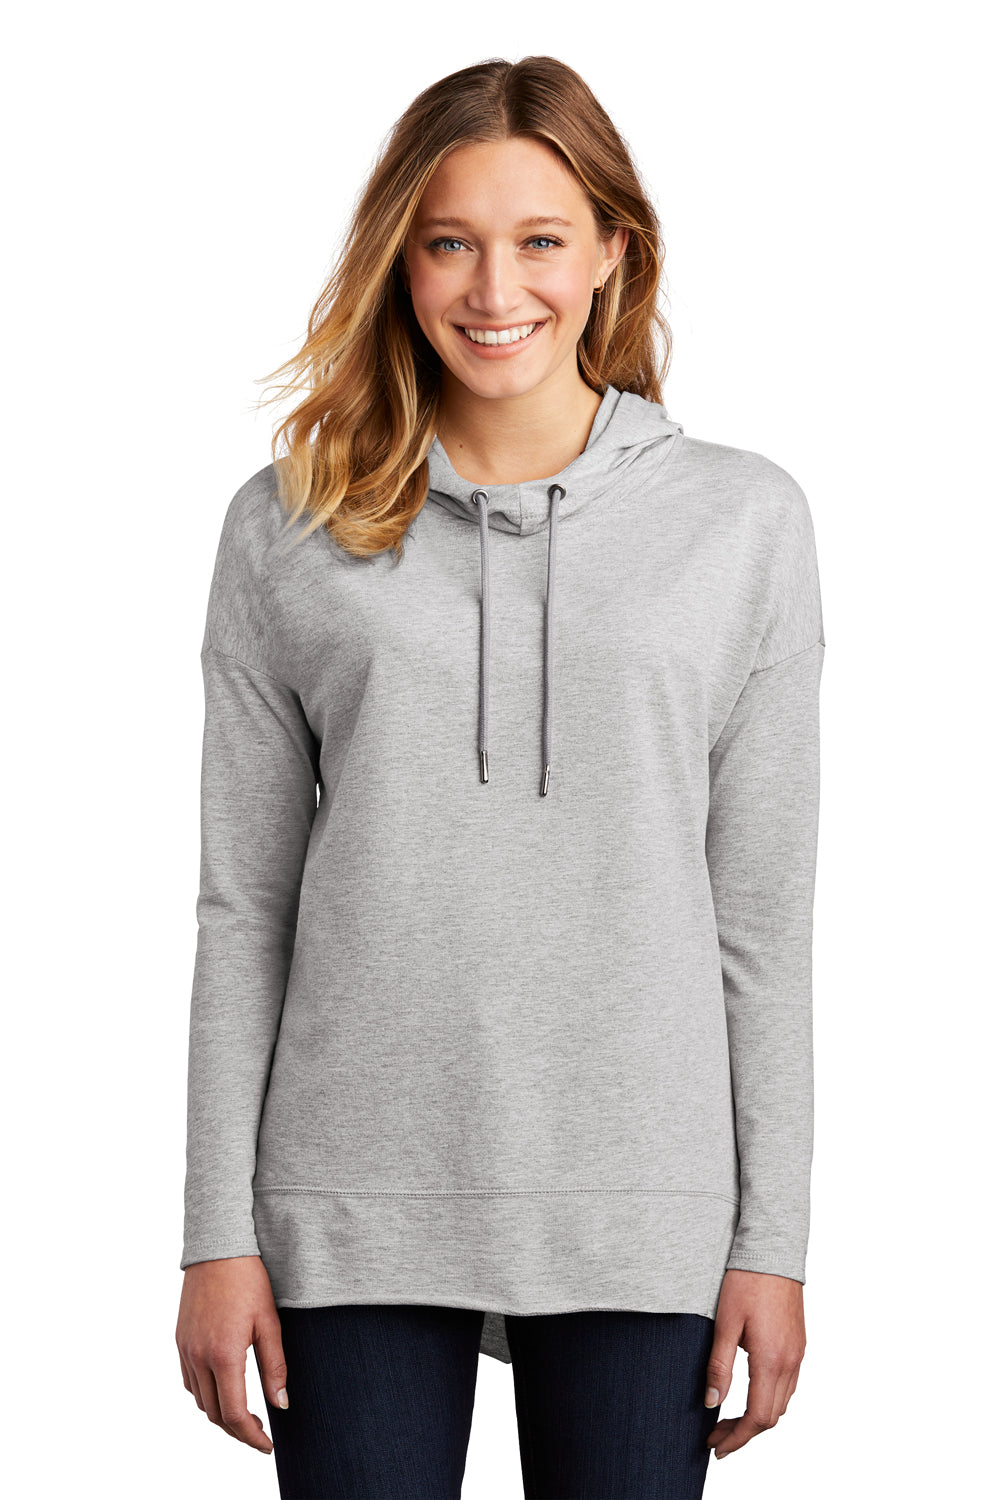 District Womens Featherweight French Terry Hooded Sweatshirt Hoodie Heather Light Grey Front